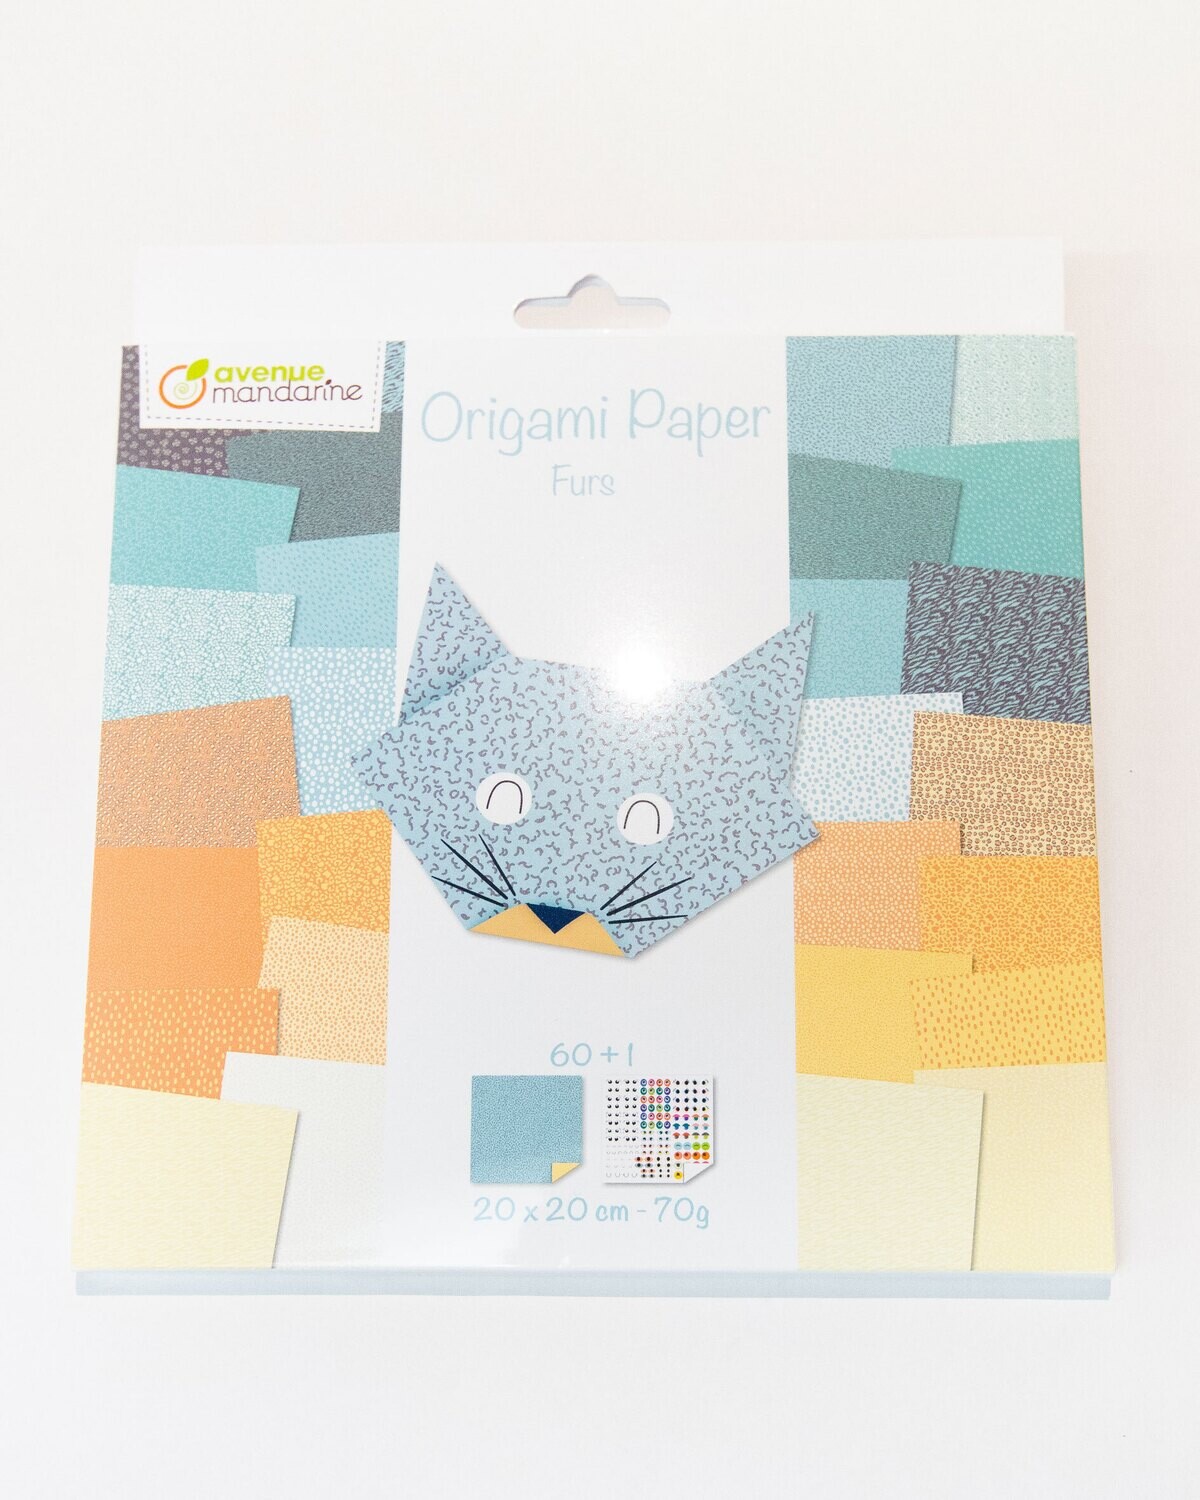 Origami Paper  Furs, 60 Page, 20 x 20 cm